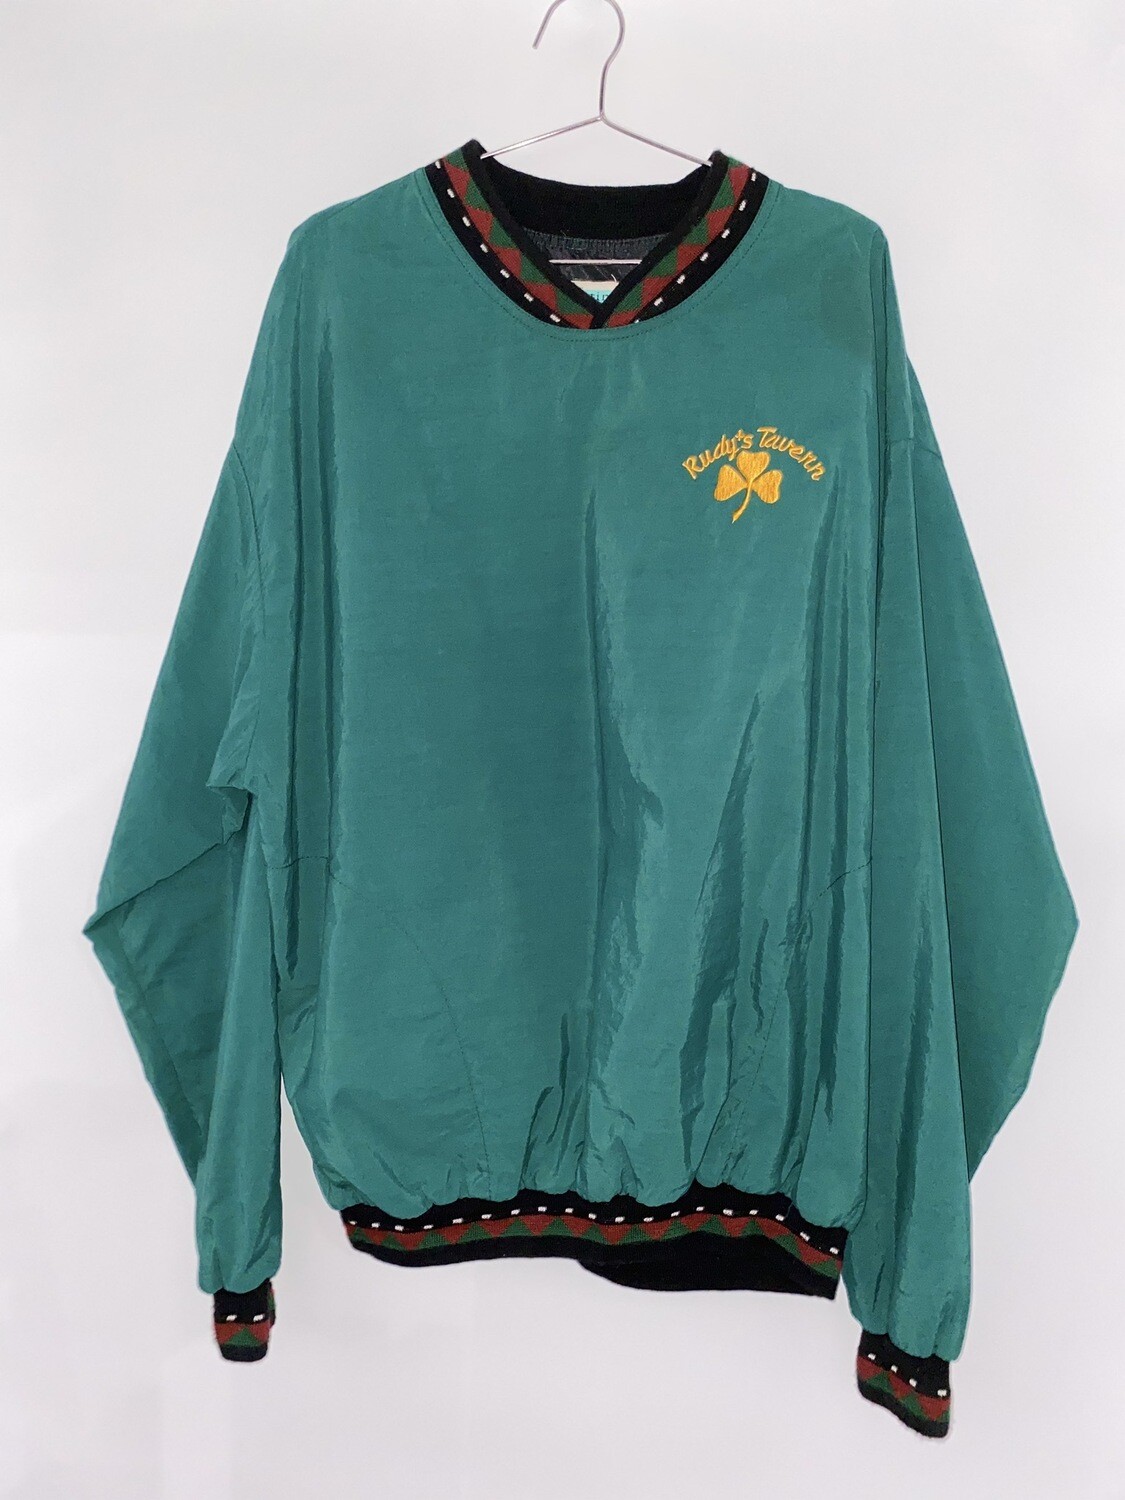 St.Martin Collection Rudy’s tavern Pullover Size L